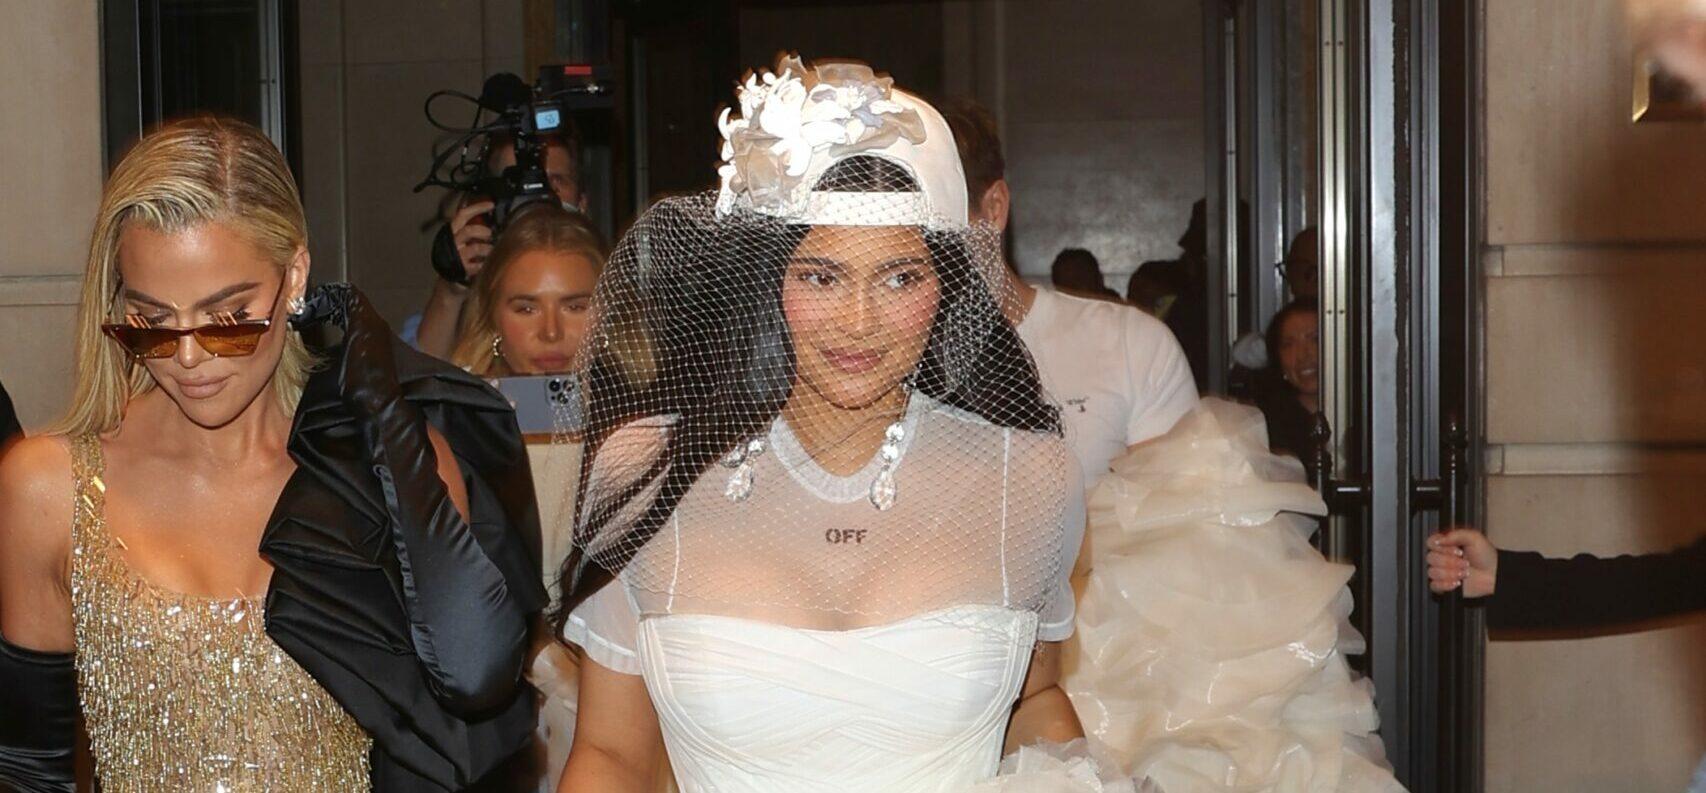 Kylie Jenner Wore a Wedding Dress to the 2022 Met Gala